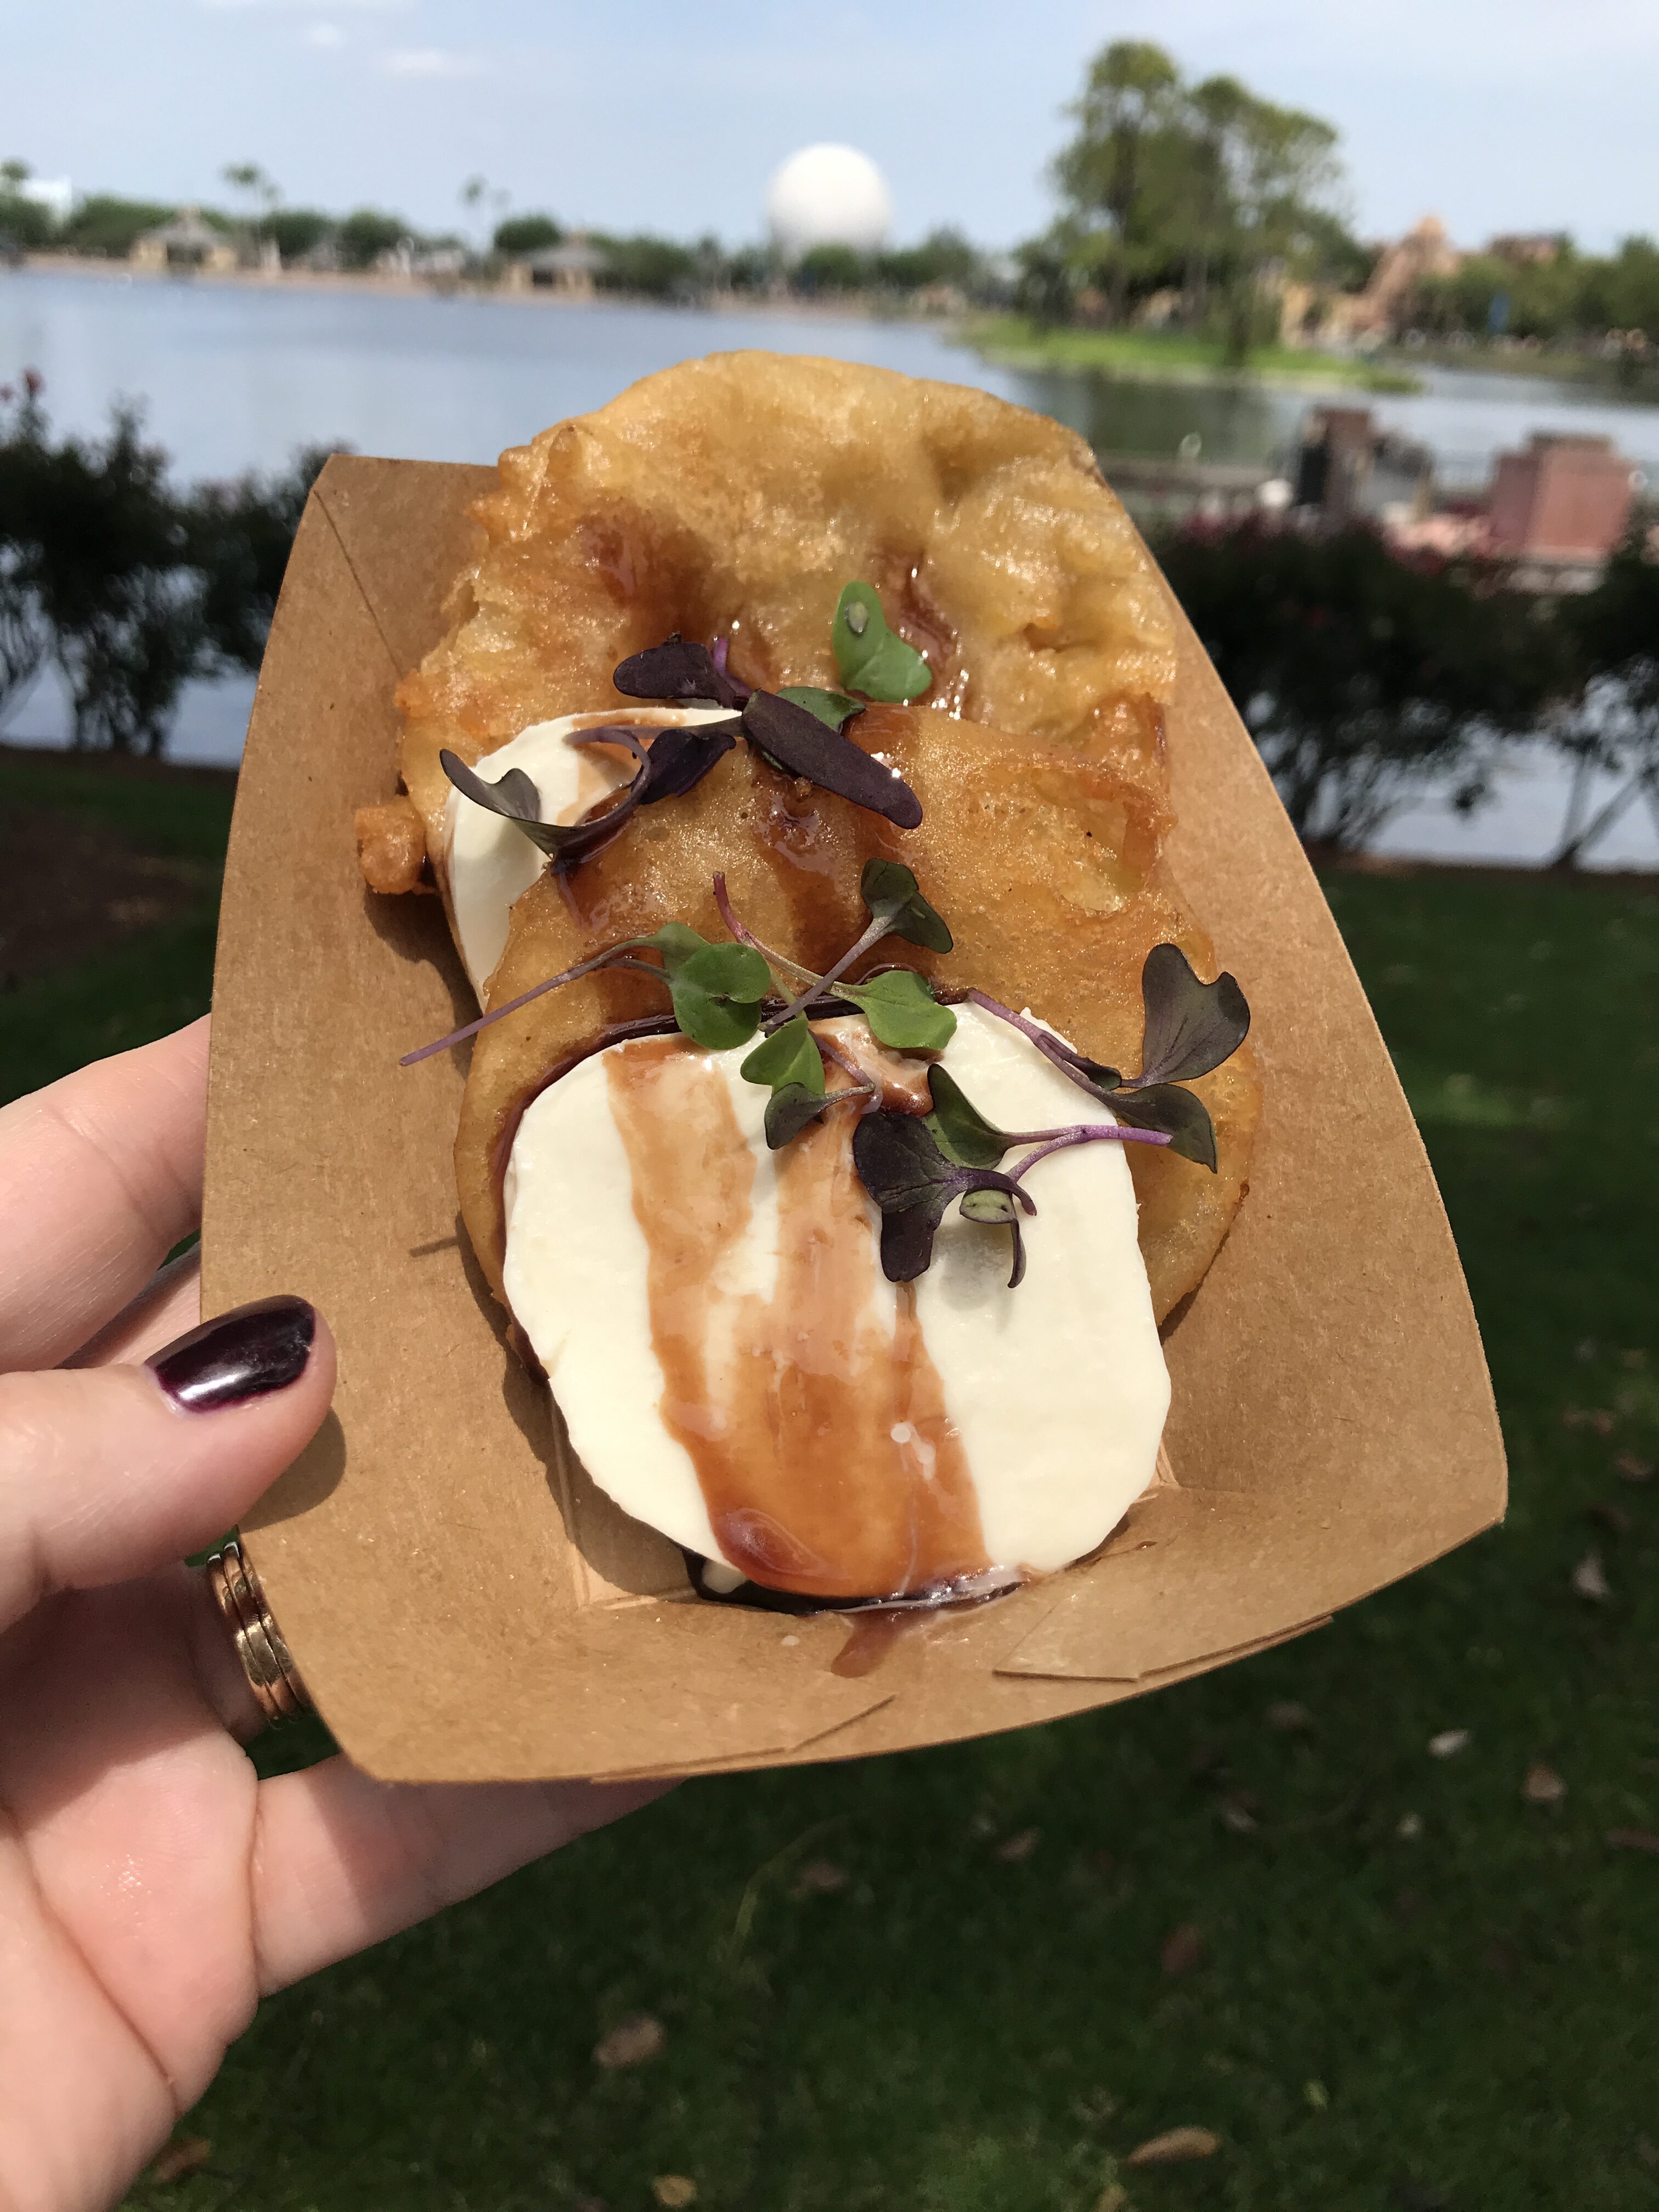 snacking around the world at the 2019 epcot international flower